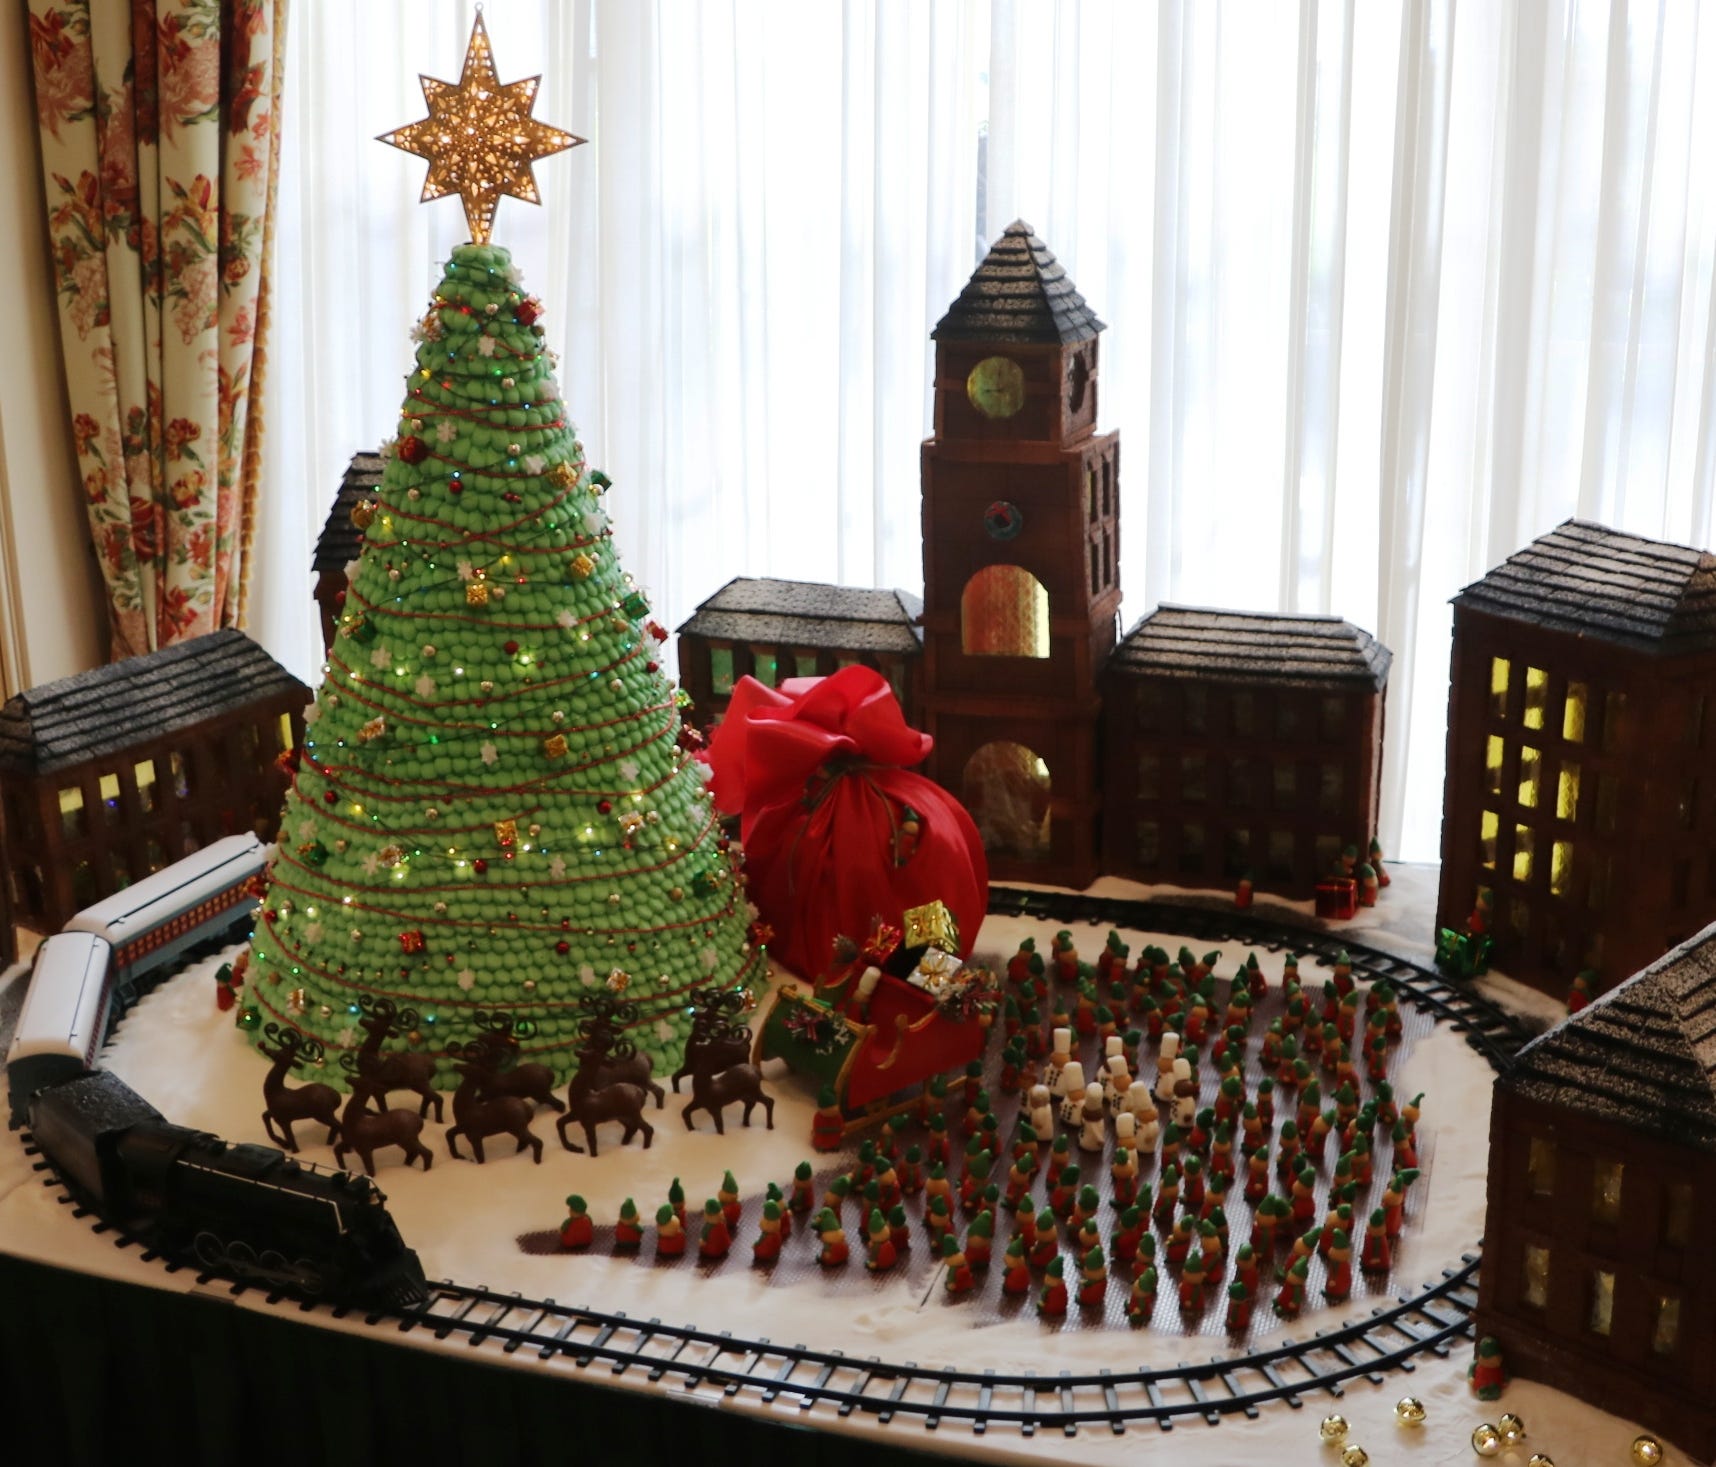 At The Sanctuary at Kiawah Island Golf Resort in South Carolina, executive pastry chef Remy Funfrock's gingerbread display is inspired by Santa's village in 'The Polar Express'. Made with more than 800 pieces of gingerbread, the scene features 250 el